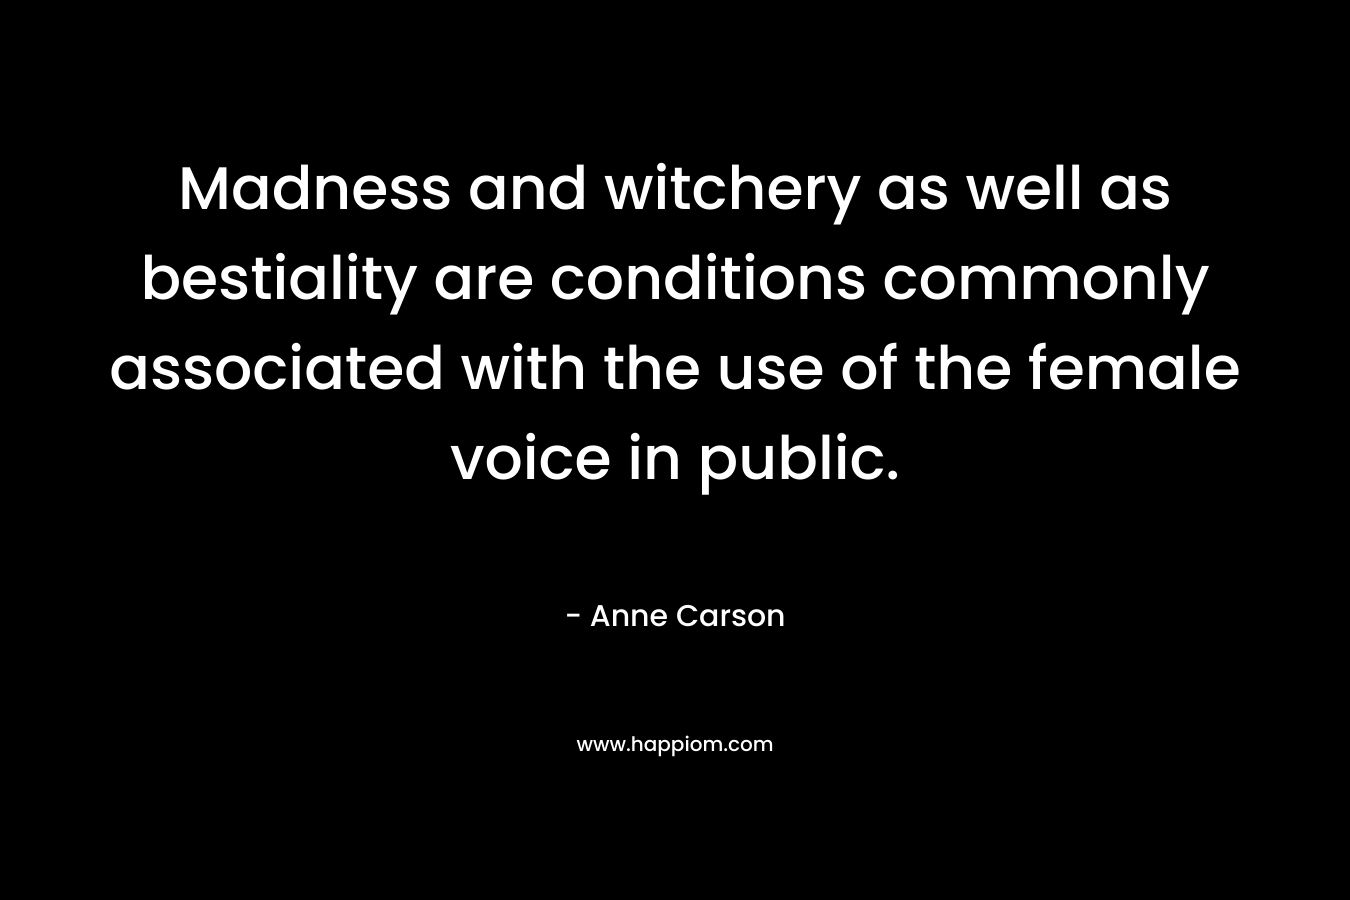 Madness and witchery as well as bestiality are conditions commonly associated with the use of the female voice in public.